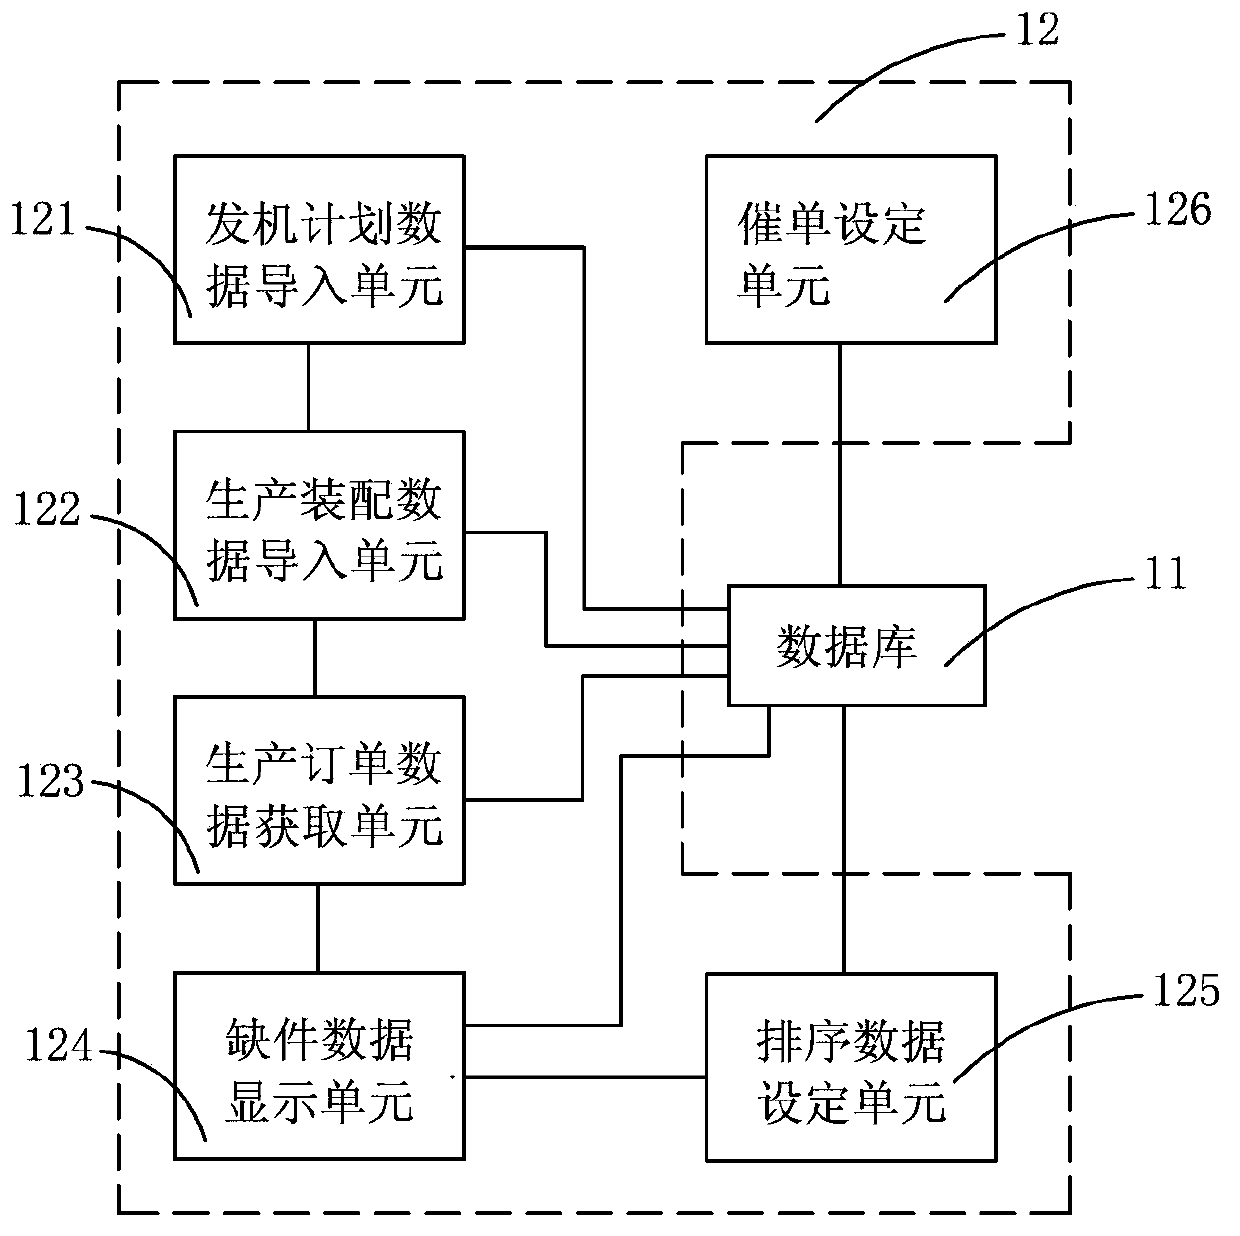 Lean pulling production data processing system